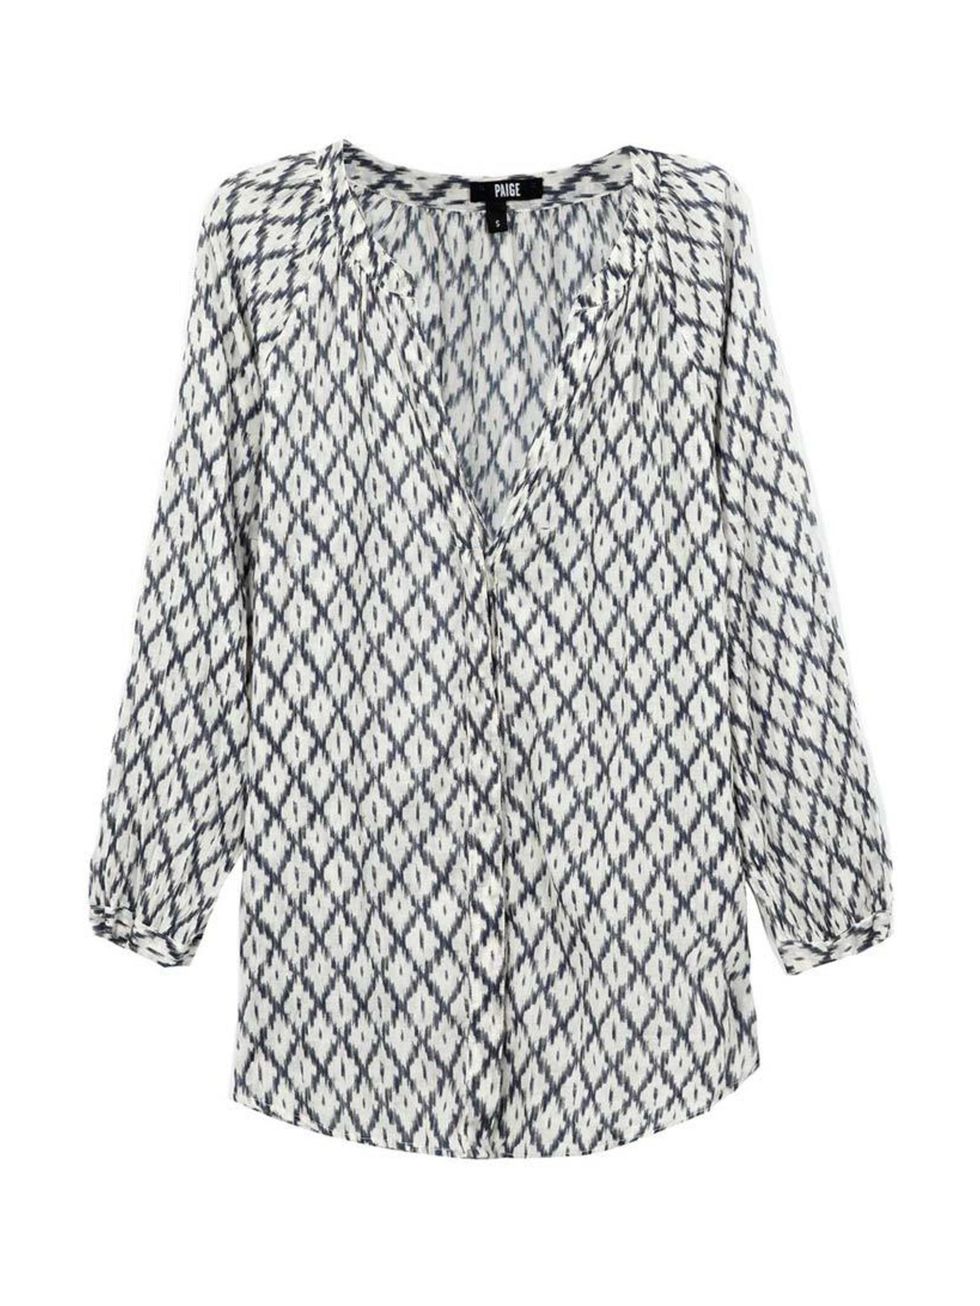 <p>Pair this slinky printed shirt with cigarette pants. </p>

<p>Paige top, £180 at <a href="http://www.trilogystores.co.uk/paige/sammy-top-in-alexandria.aspx" target="_blank">Trilogy</a></p>